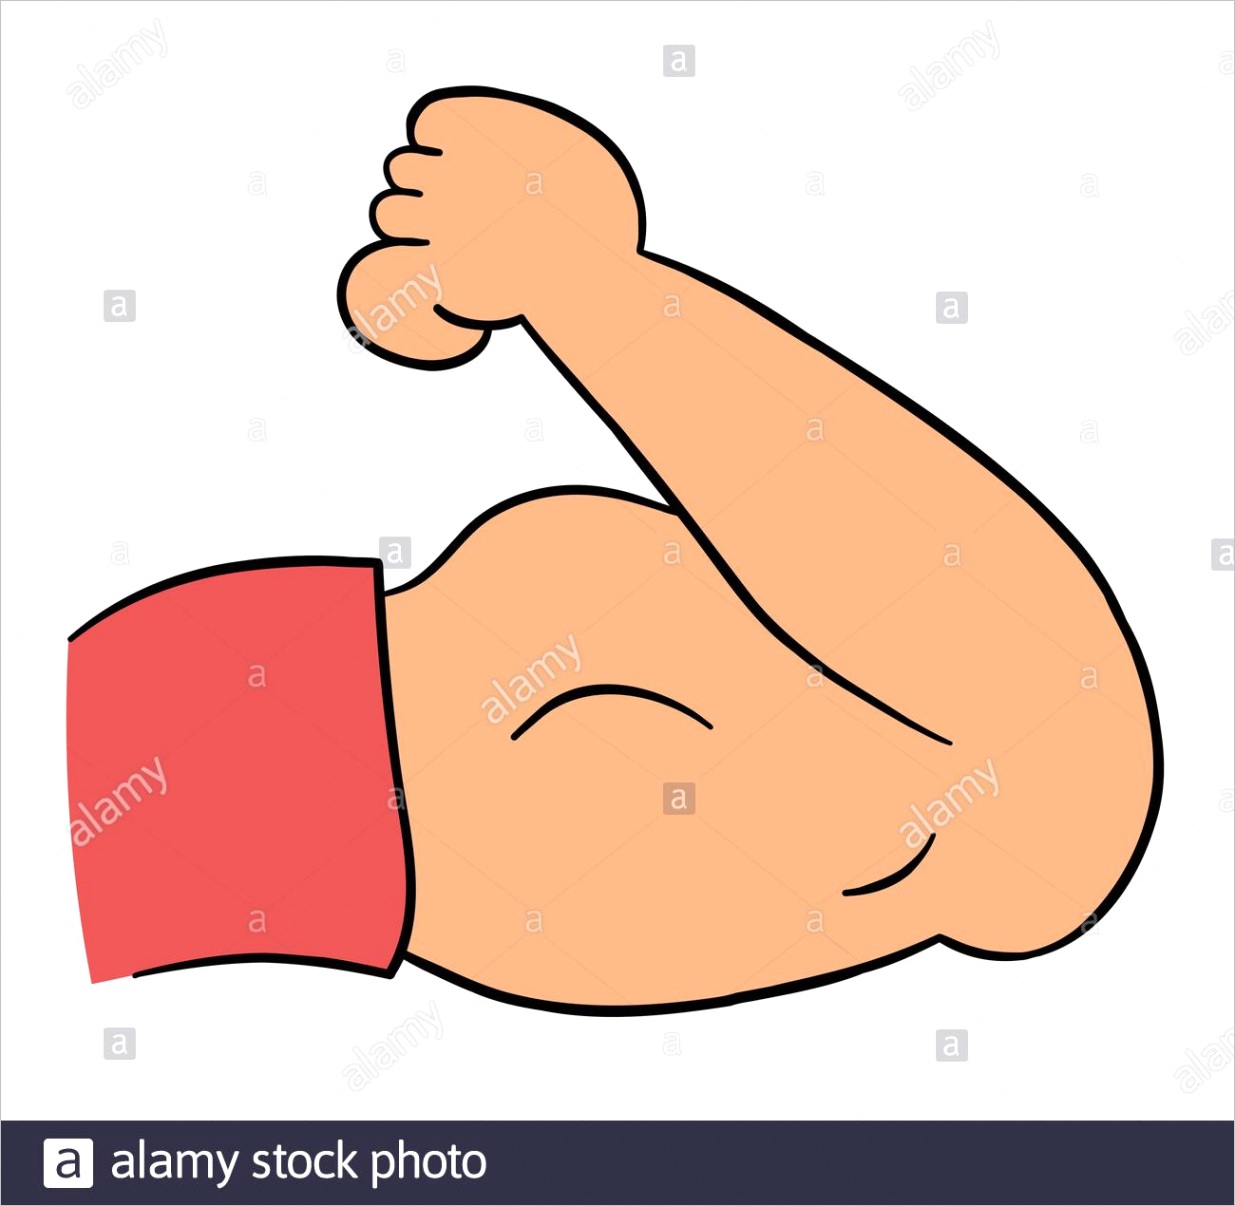 cartoon vector illustration of strong muscular arm biceps colored and black outlines image ml